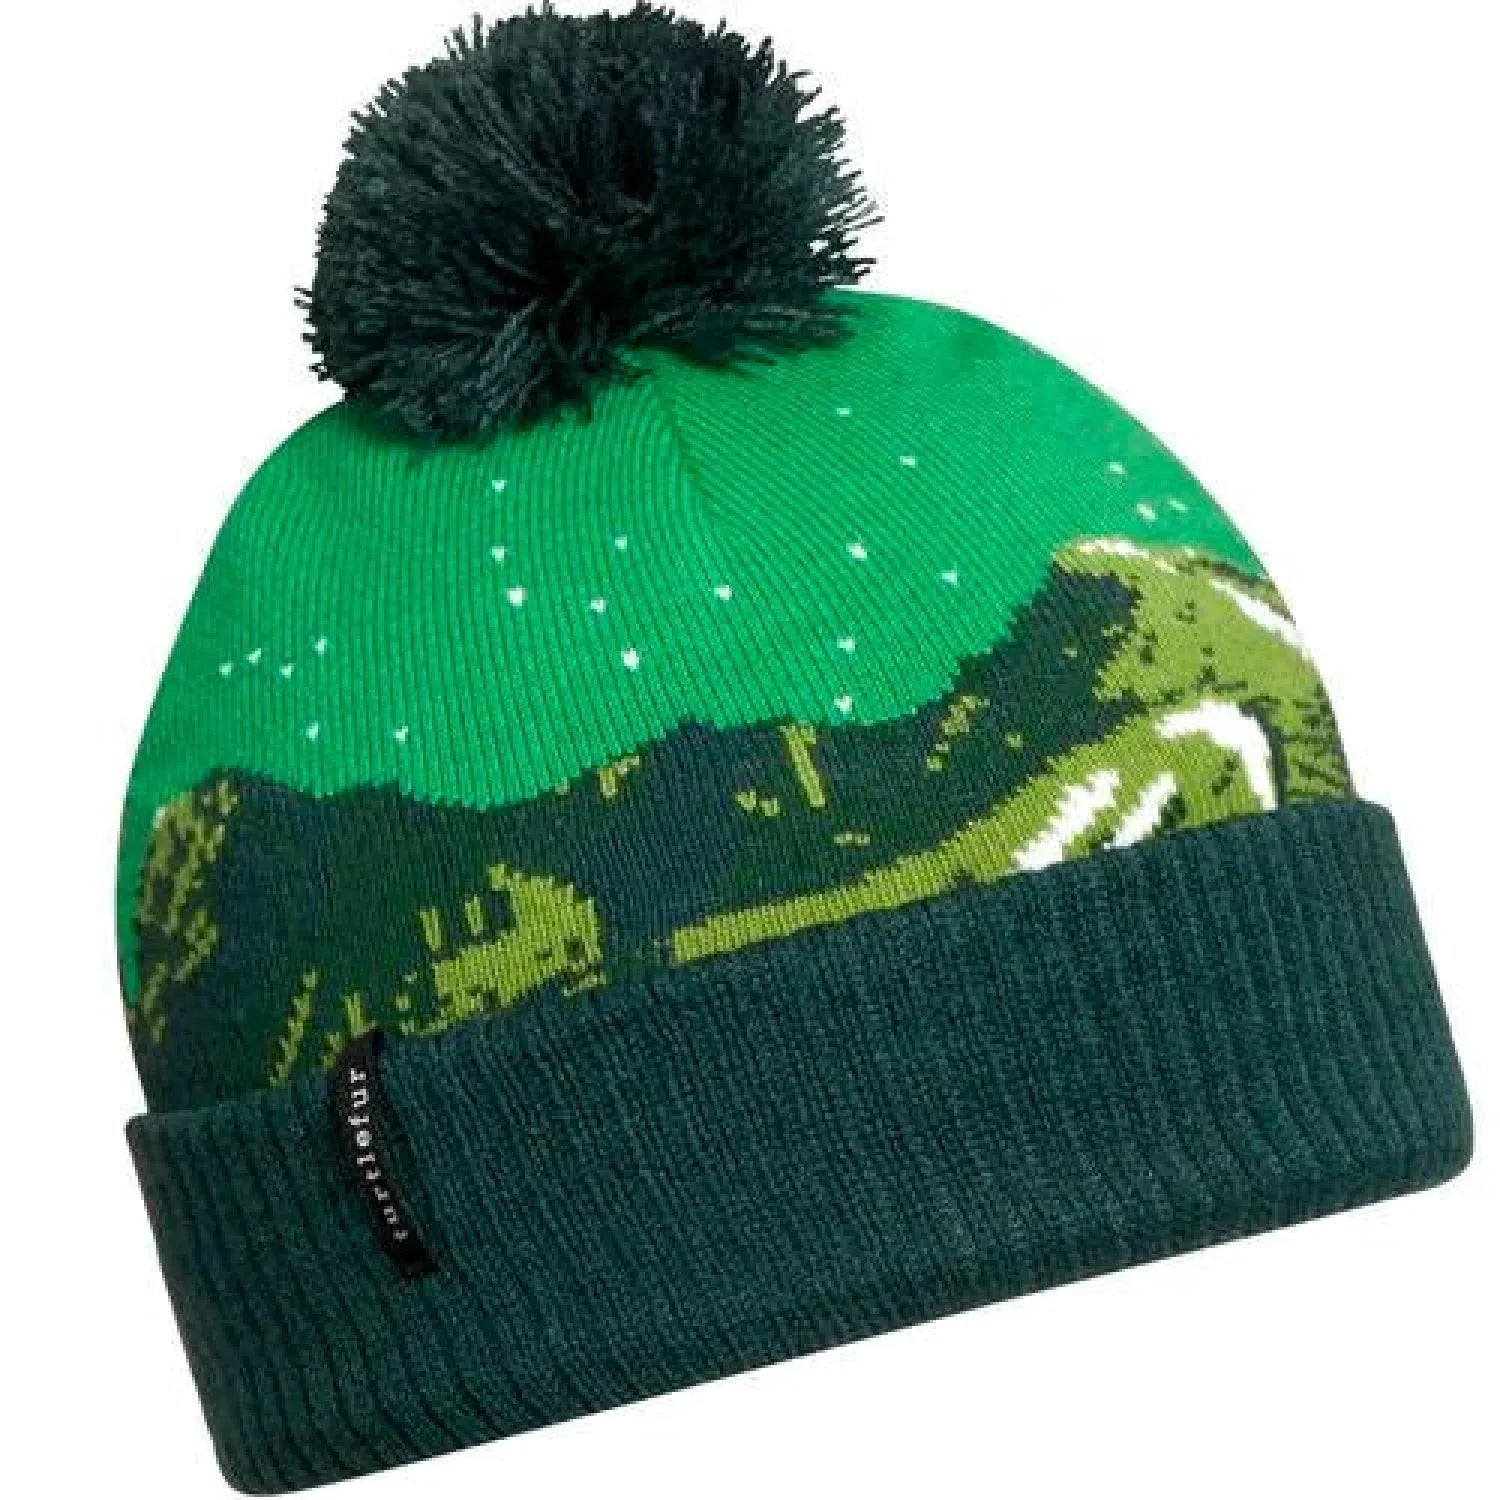 Turtle Fur Kid's Pano Beanie shown in the Green color. Front flat view.